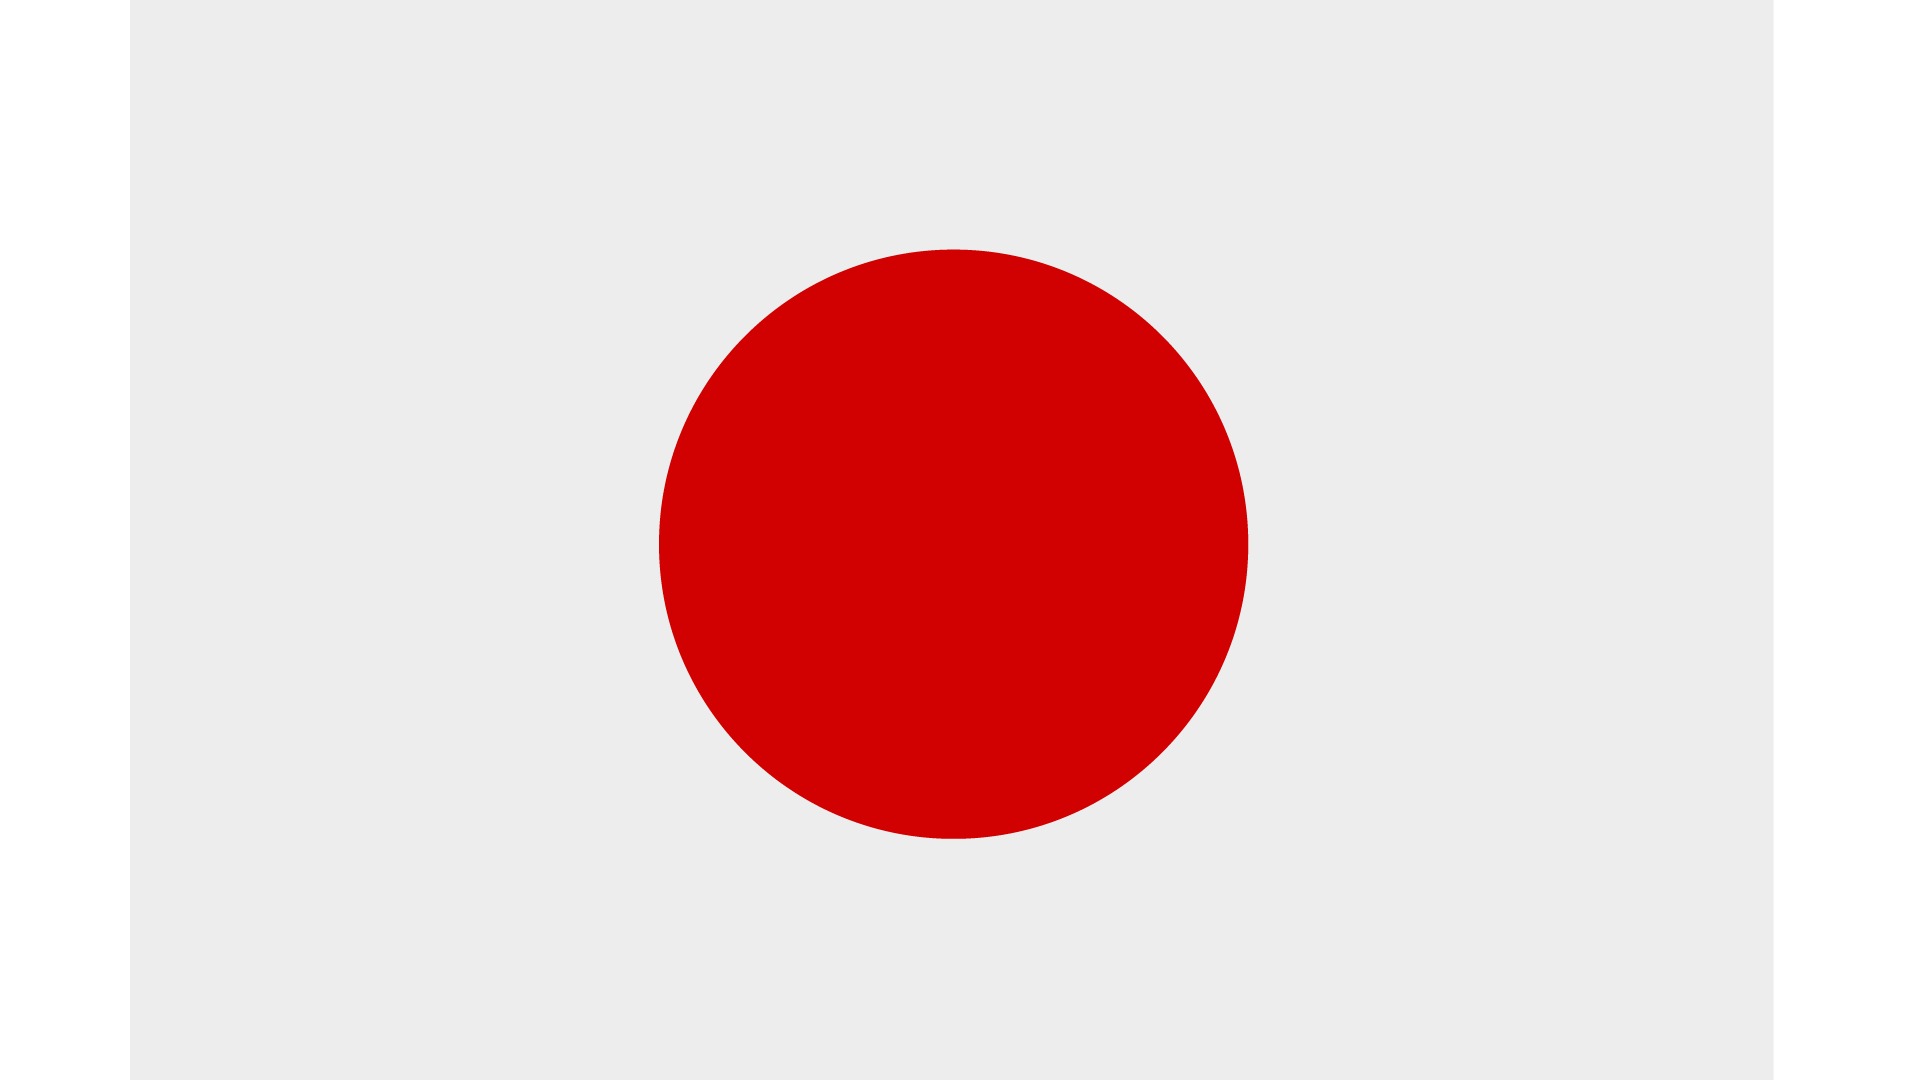 The flag of Japan in white with a large red dot in the middle.